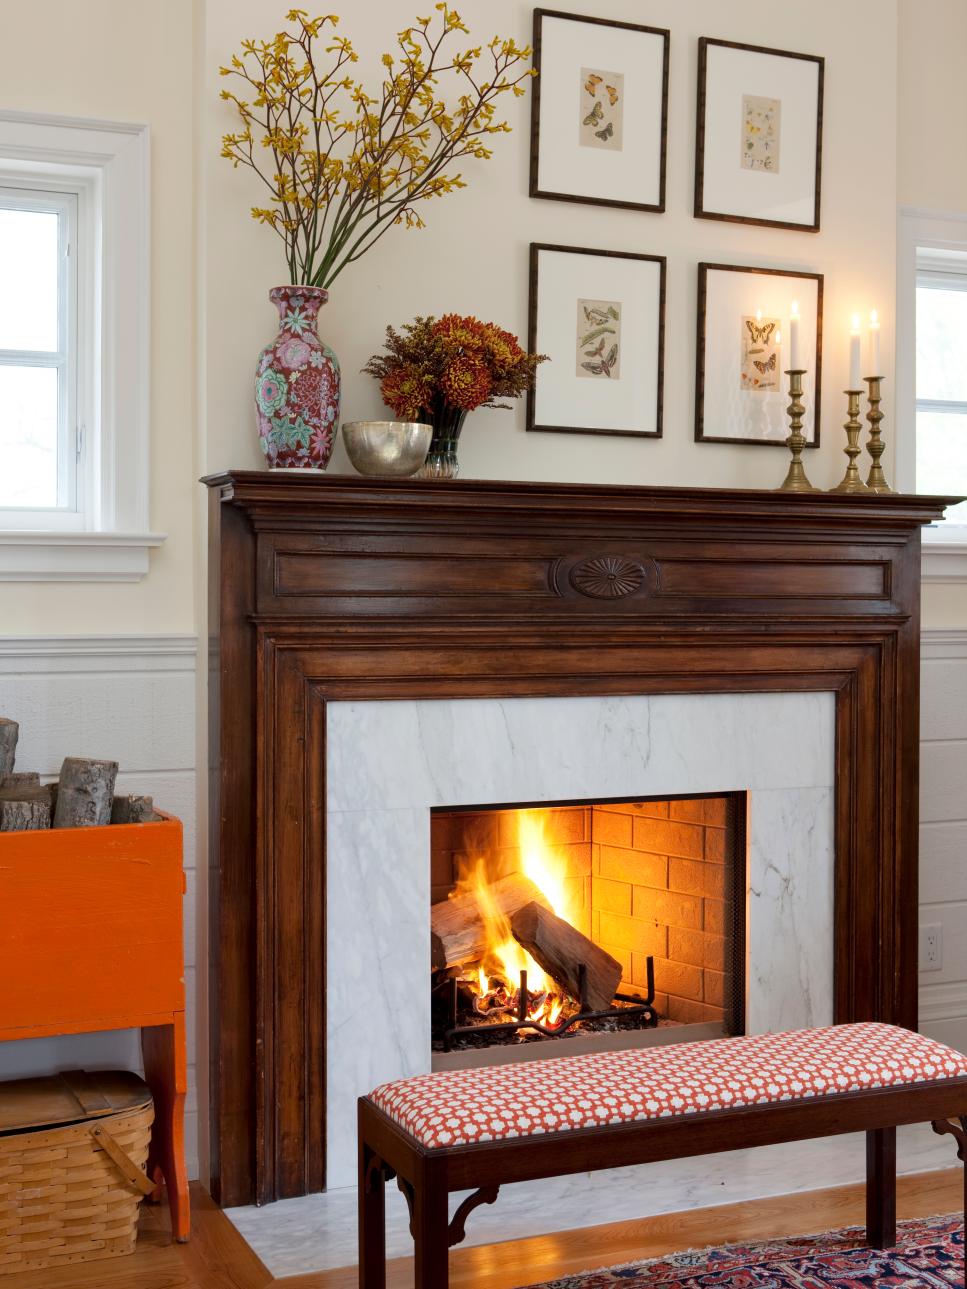 Fireplace In Bedroom With Mantel Decor